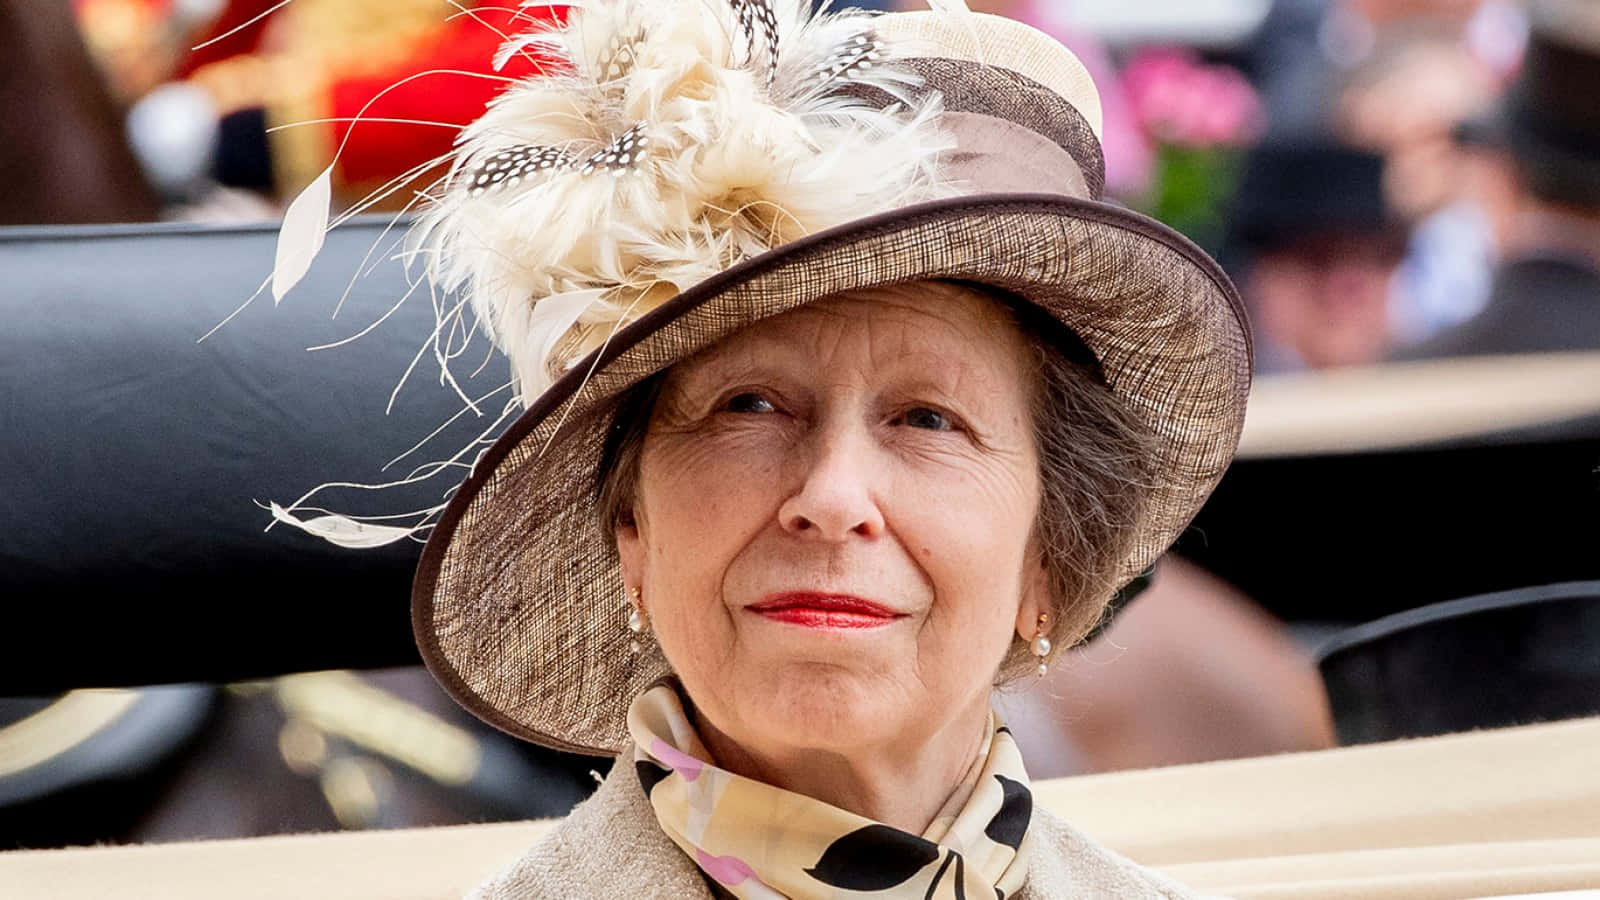 Her Royal Highness Princess Anne at the Annual Ascot Racecourse Wallpaper